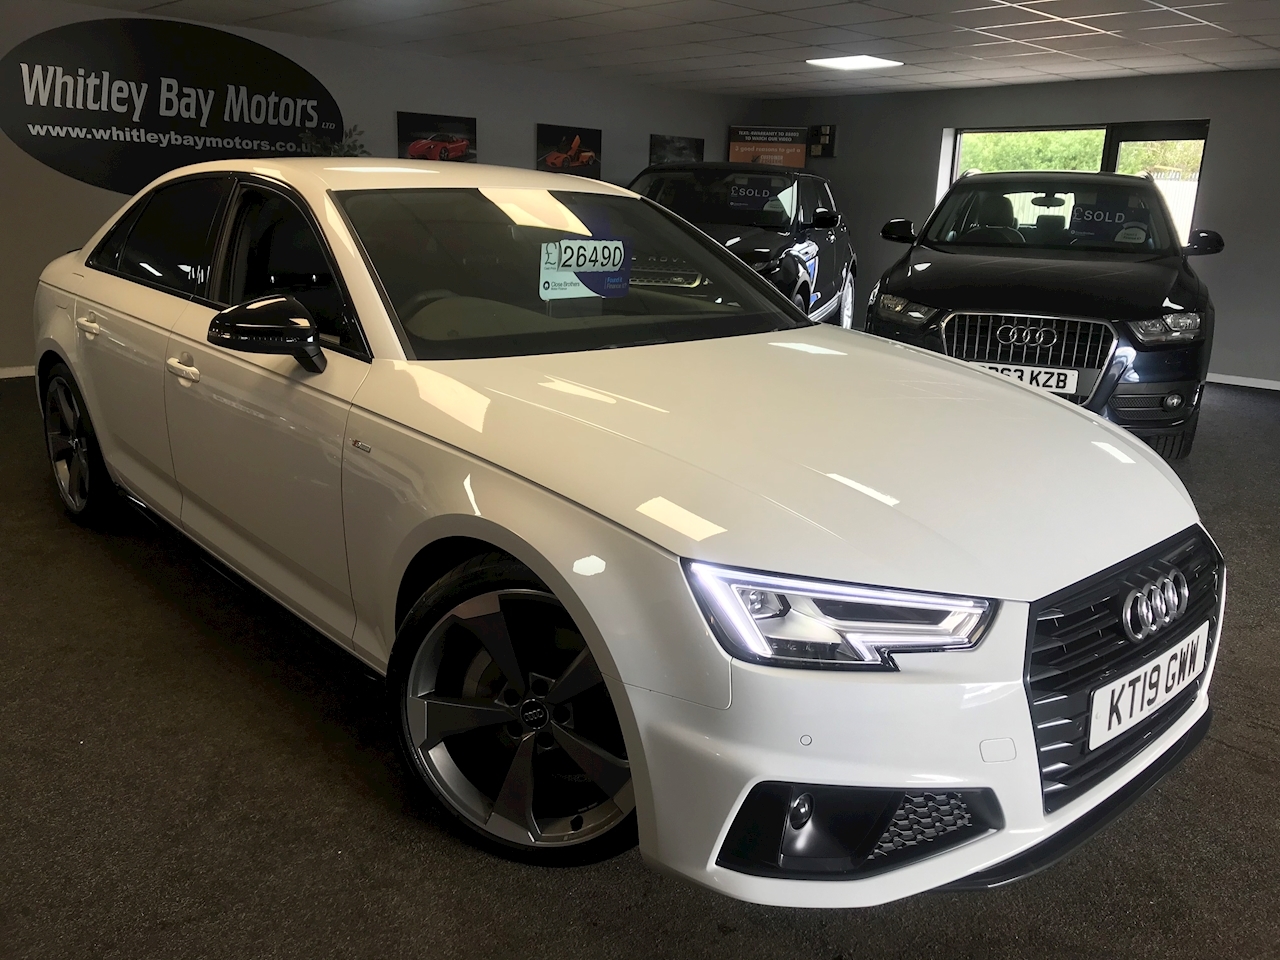 A4 Black Edition 2.0 4dr Saloon S Tronic Diesel